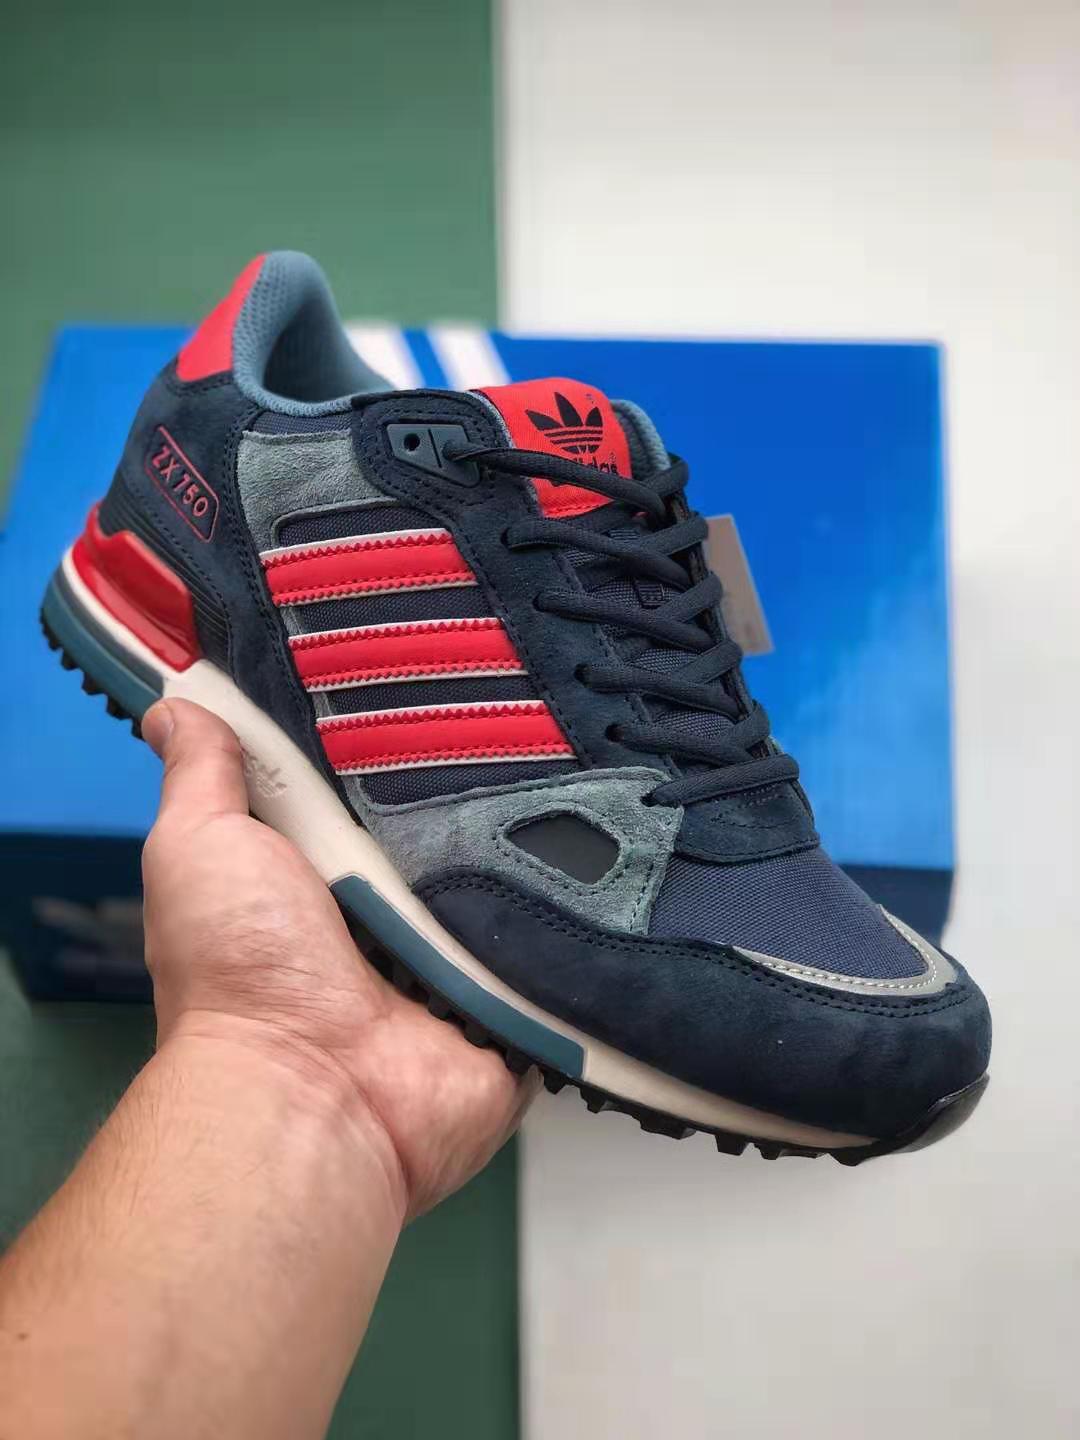 Adidas ZX 750 Navy Black Red M18260 - Stylish Sneakers for Men